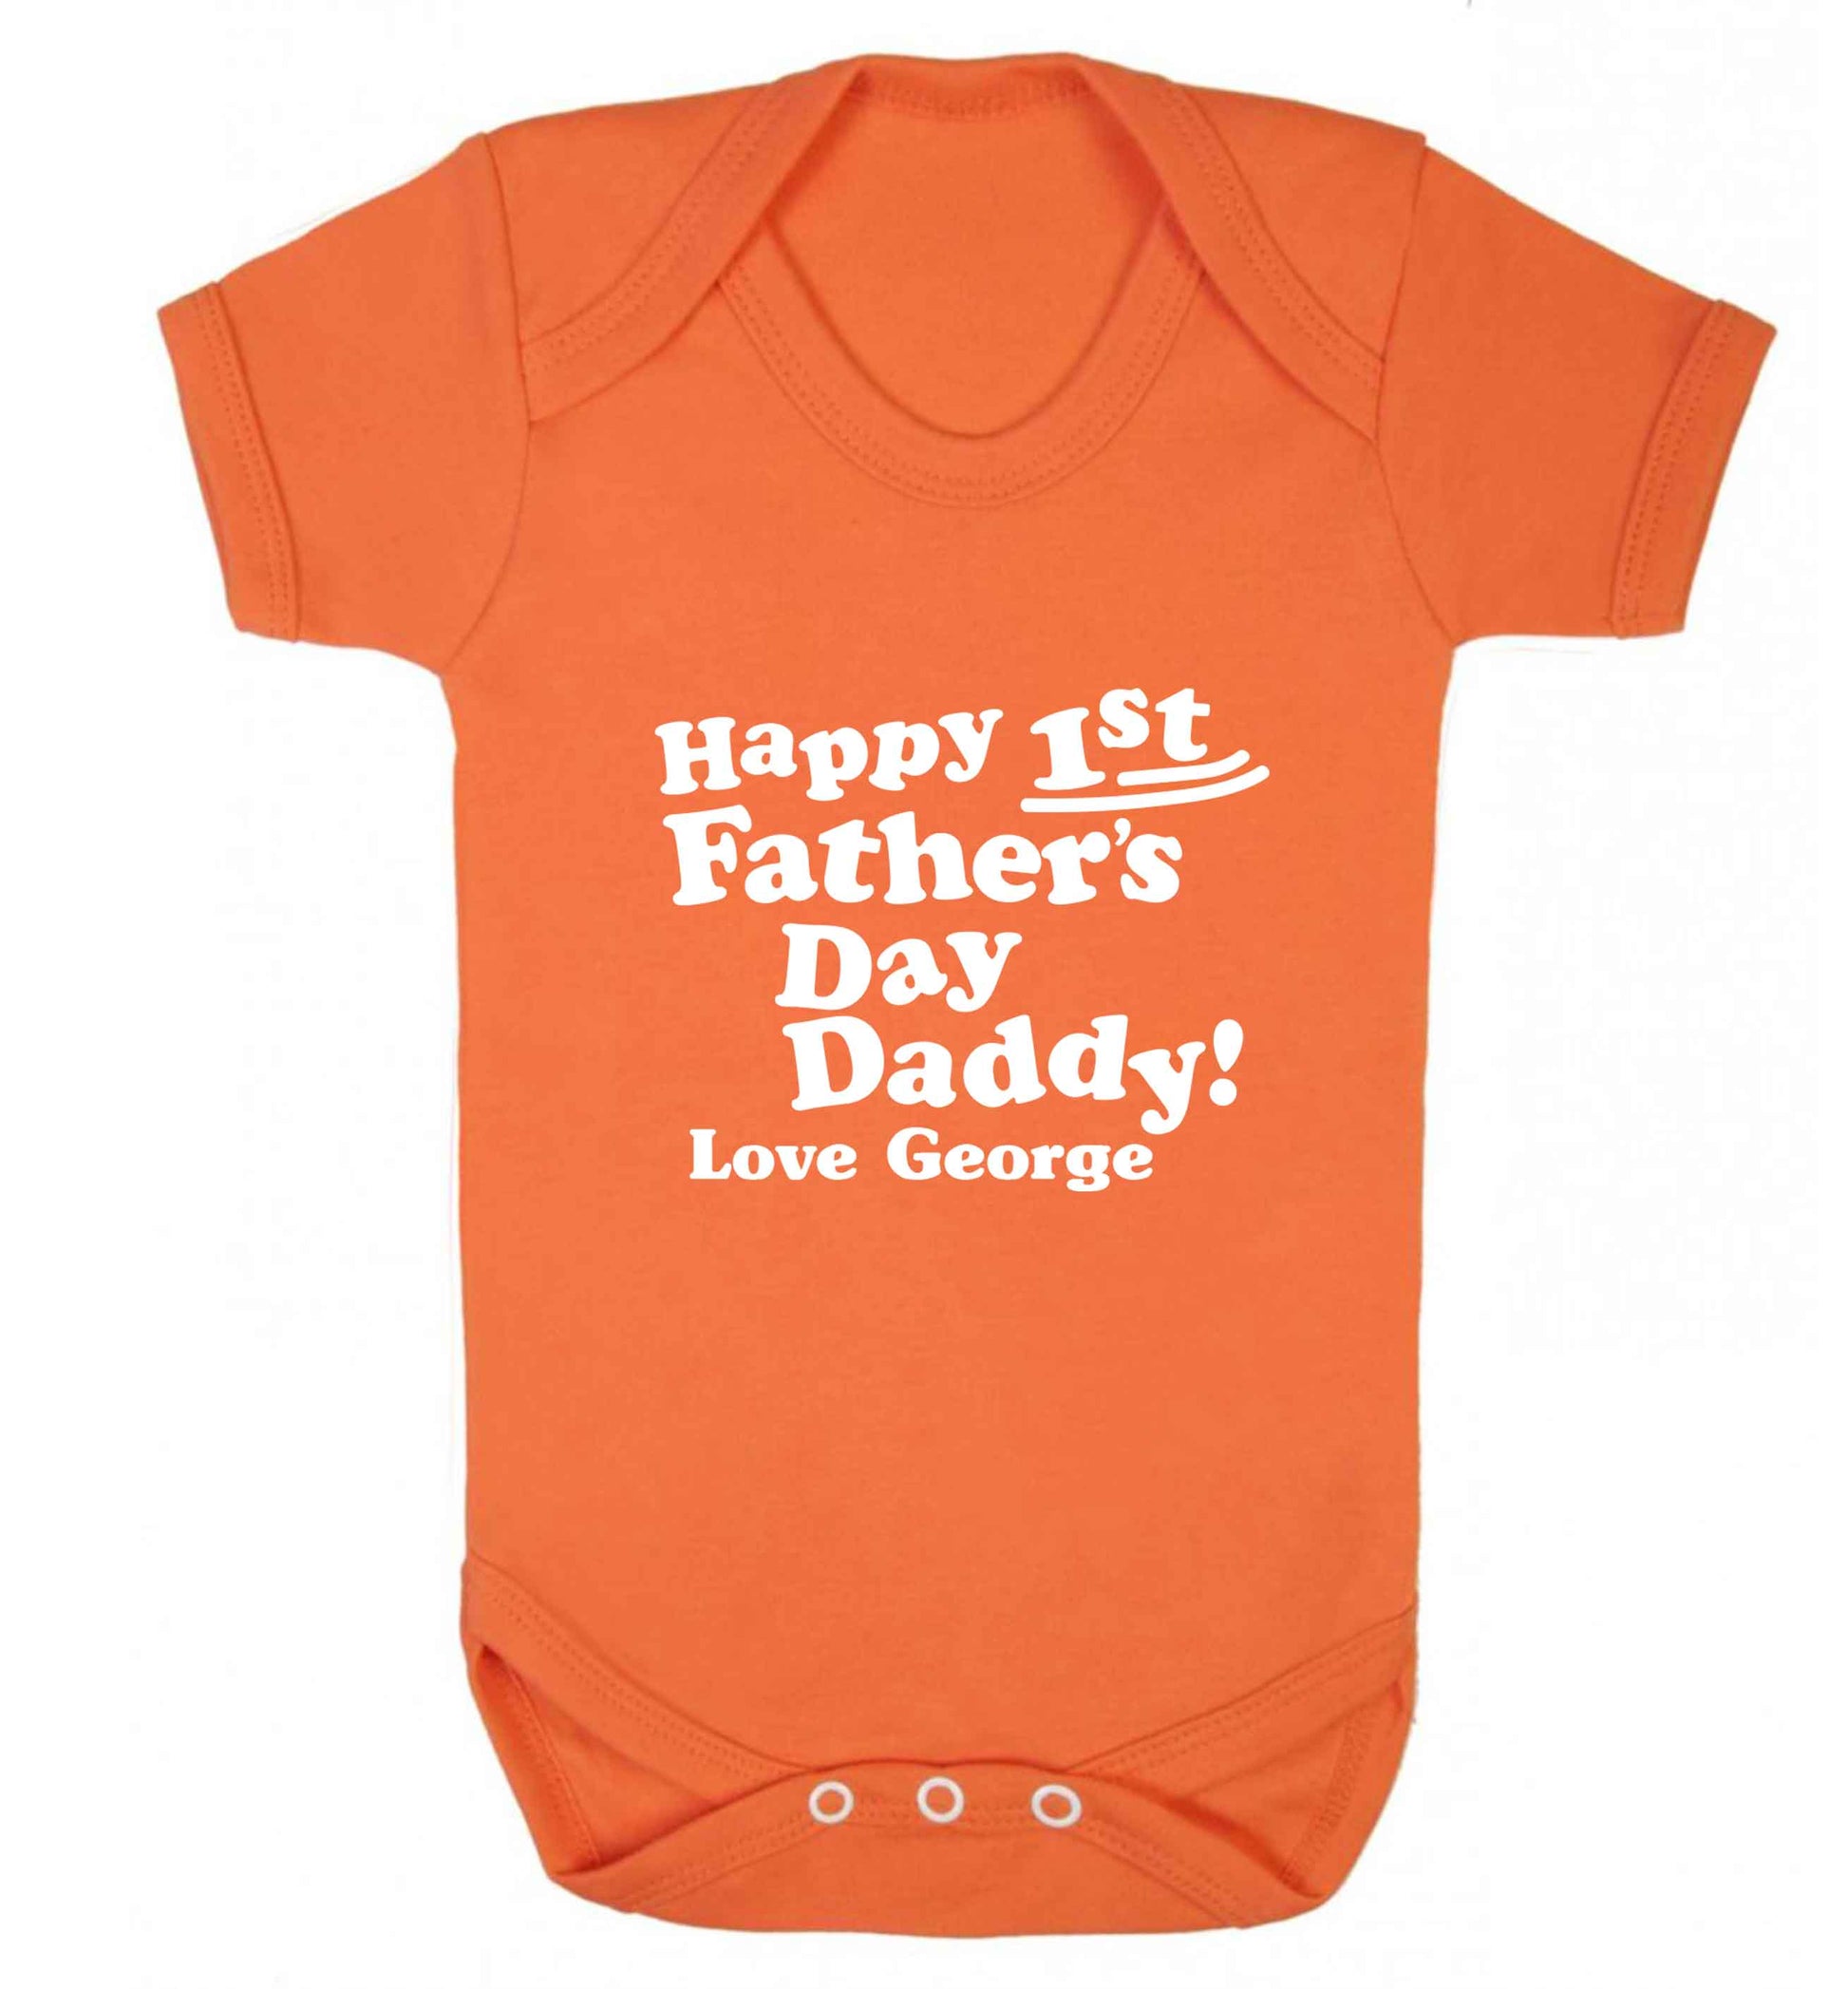 Happy first Fathers Day daddy love personalised baby vest orange 18-24 months